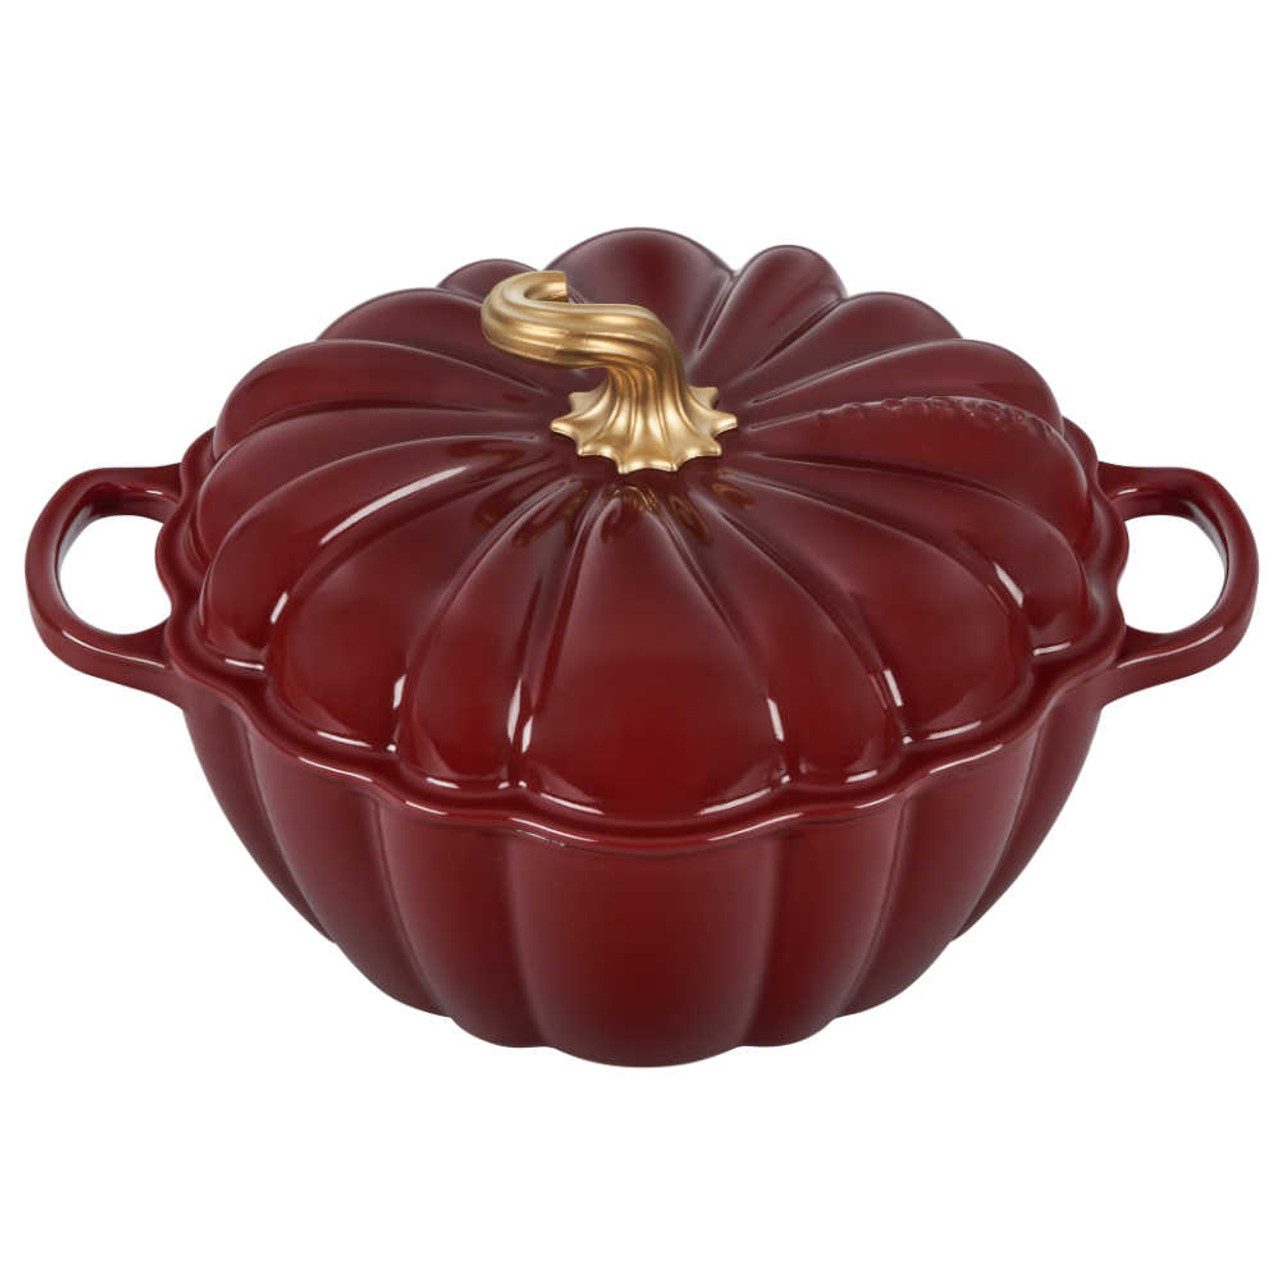 https://cdn11.bigcommerce.com/s-hccytny0od/images/stencil/1280x1280/products/5567/24326/Le_Creuset_Pumpkin_Cocotte_in_Rhone__65208.1691083245.jpg?c=2?imbypass=on